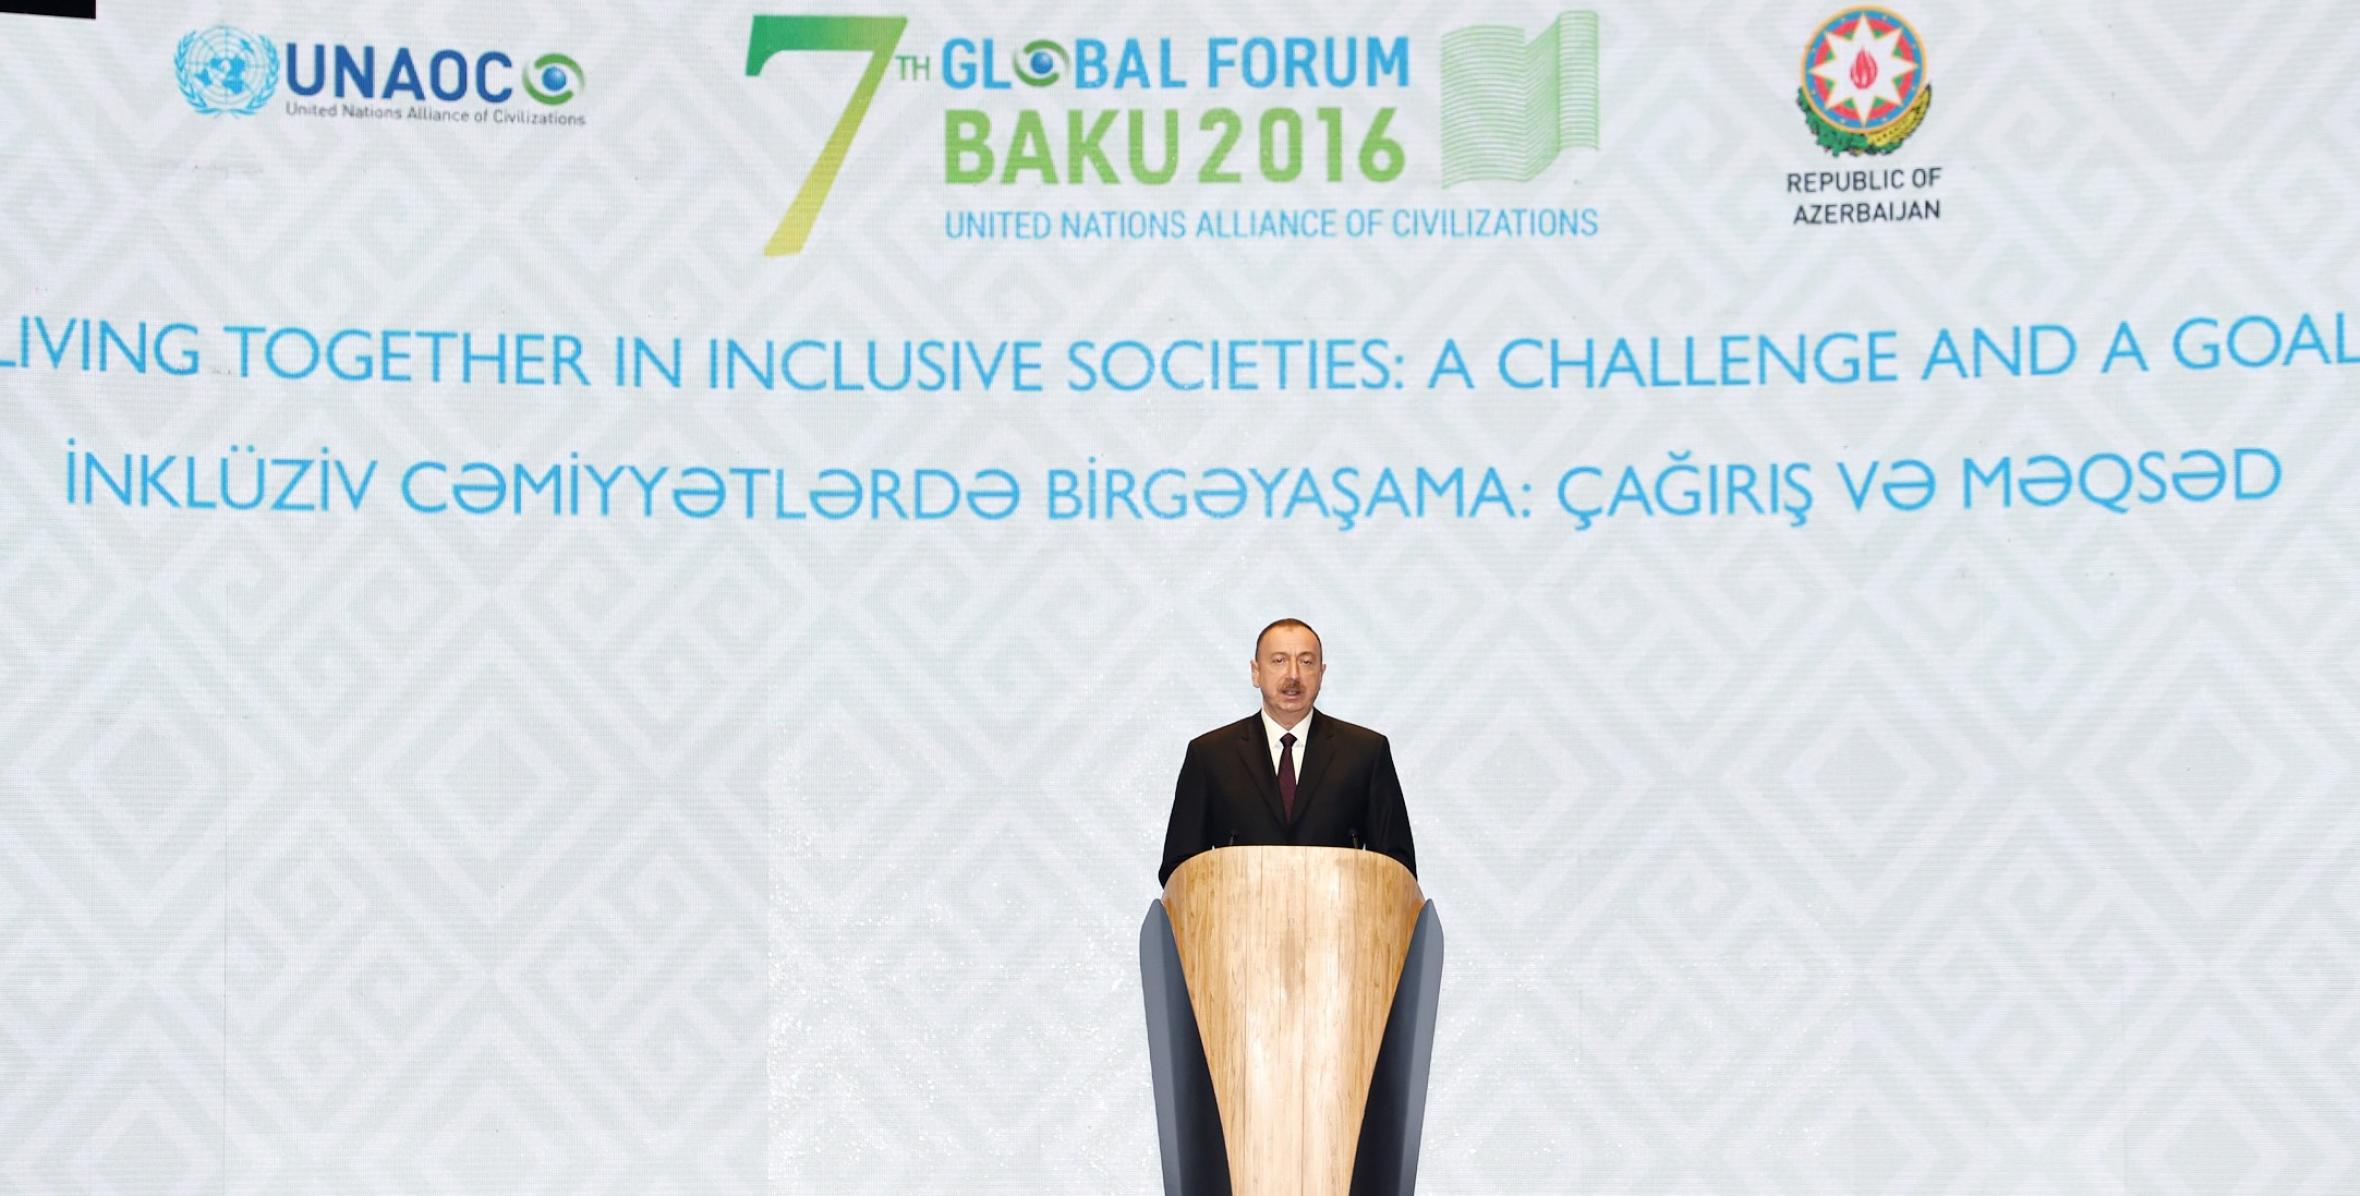 Speech by Ilham Aliyev at the official opening of 7th UNAOC Global Forum